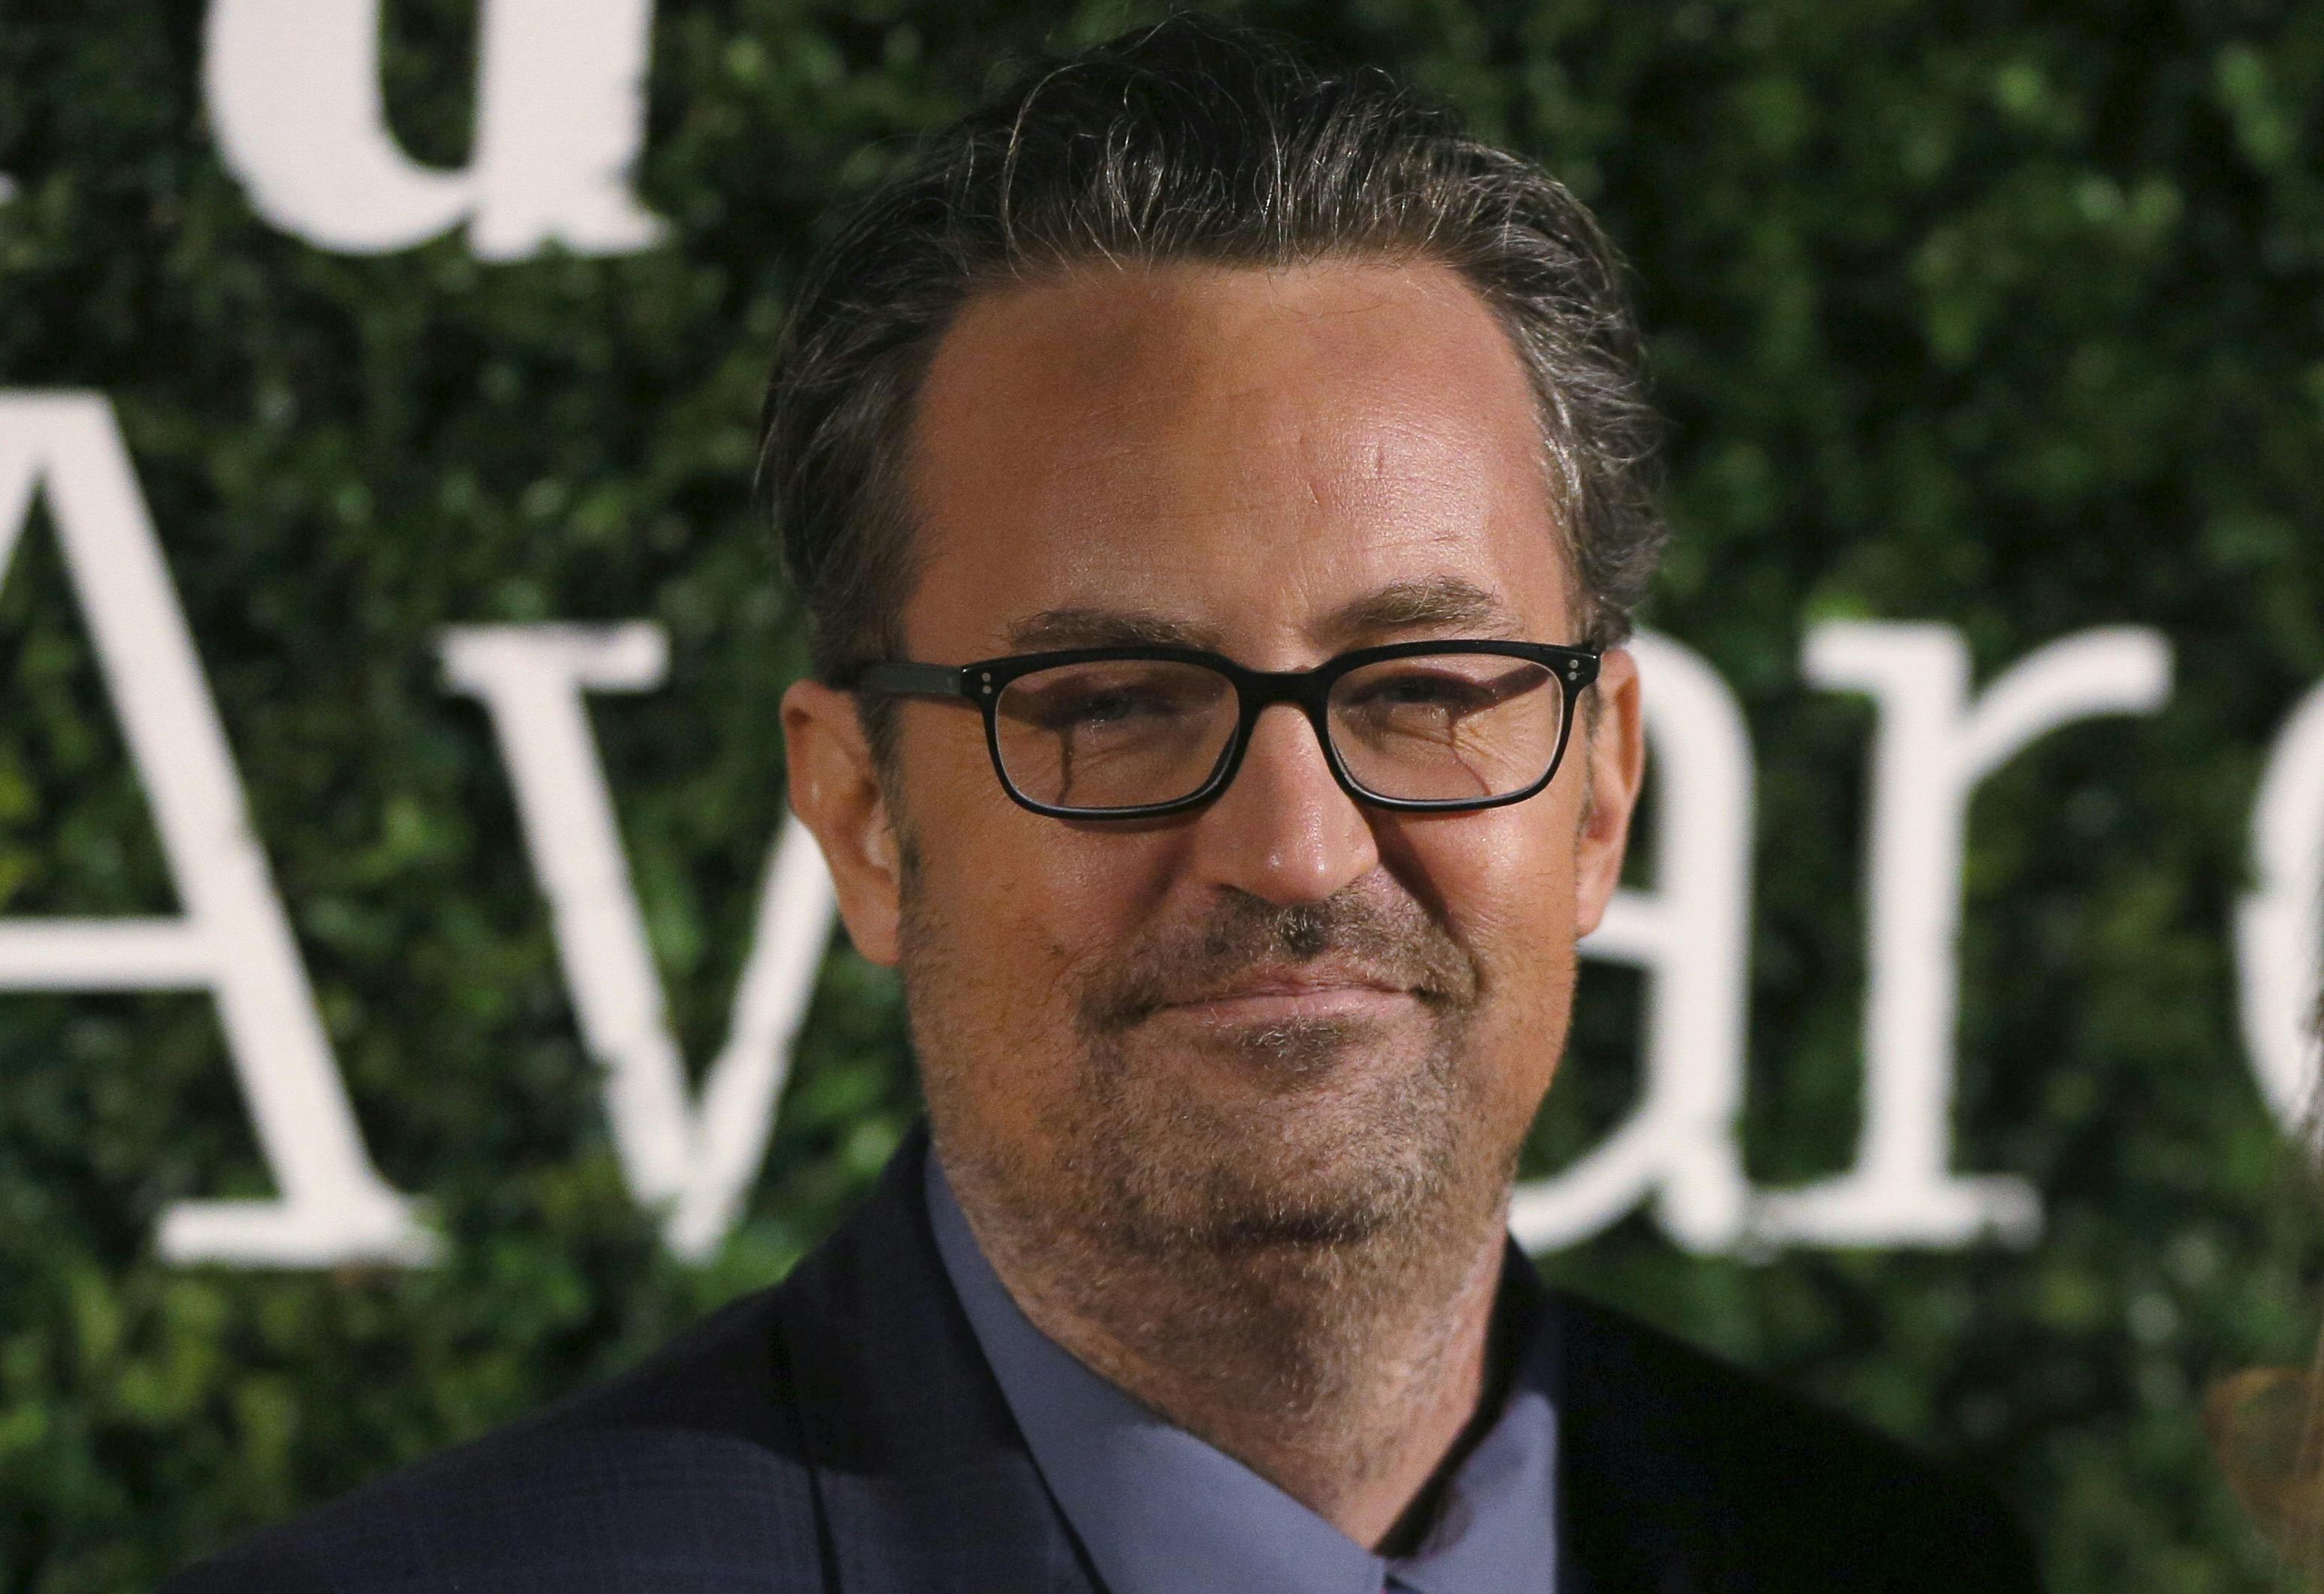 U.S. actor Matthew Perry poses for photographers at the Evening Standard British Film Awards in London, Britain, in this February 7, 2016 file picture. "Friends" star Matthew Perry swaps the television screen for the London stage in "The End of Longing, " his playwriting debut about four people feeling the pressures of life as they reach their forties. REUTERS/Neil Hall/Files